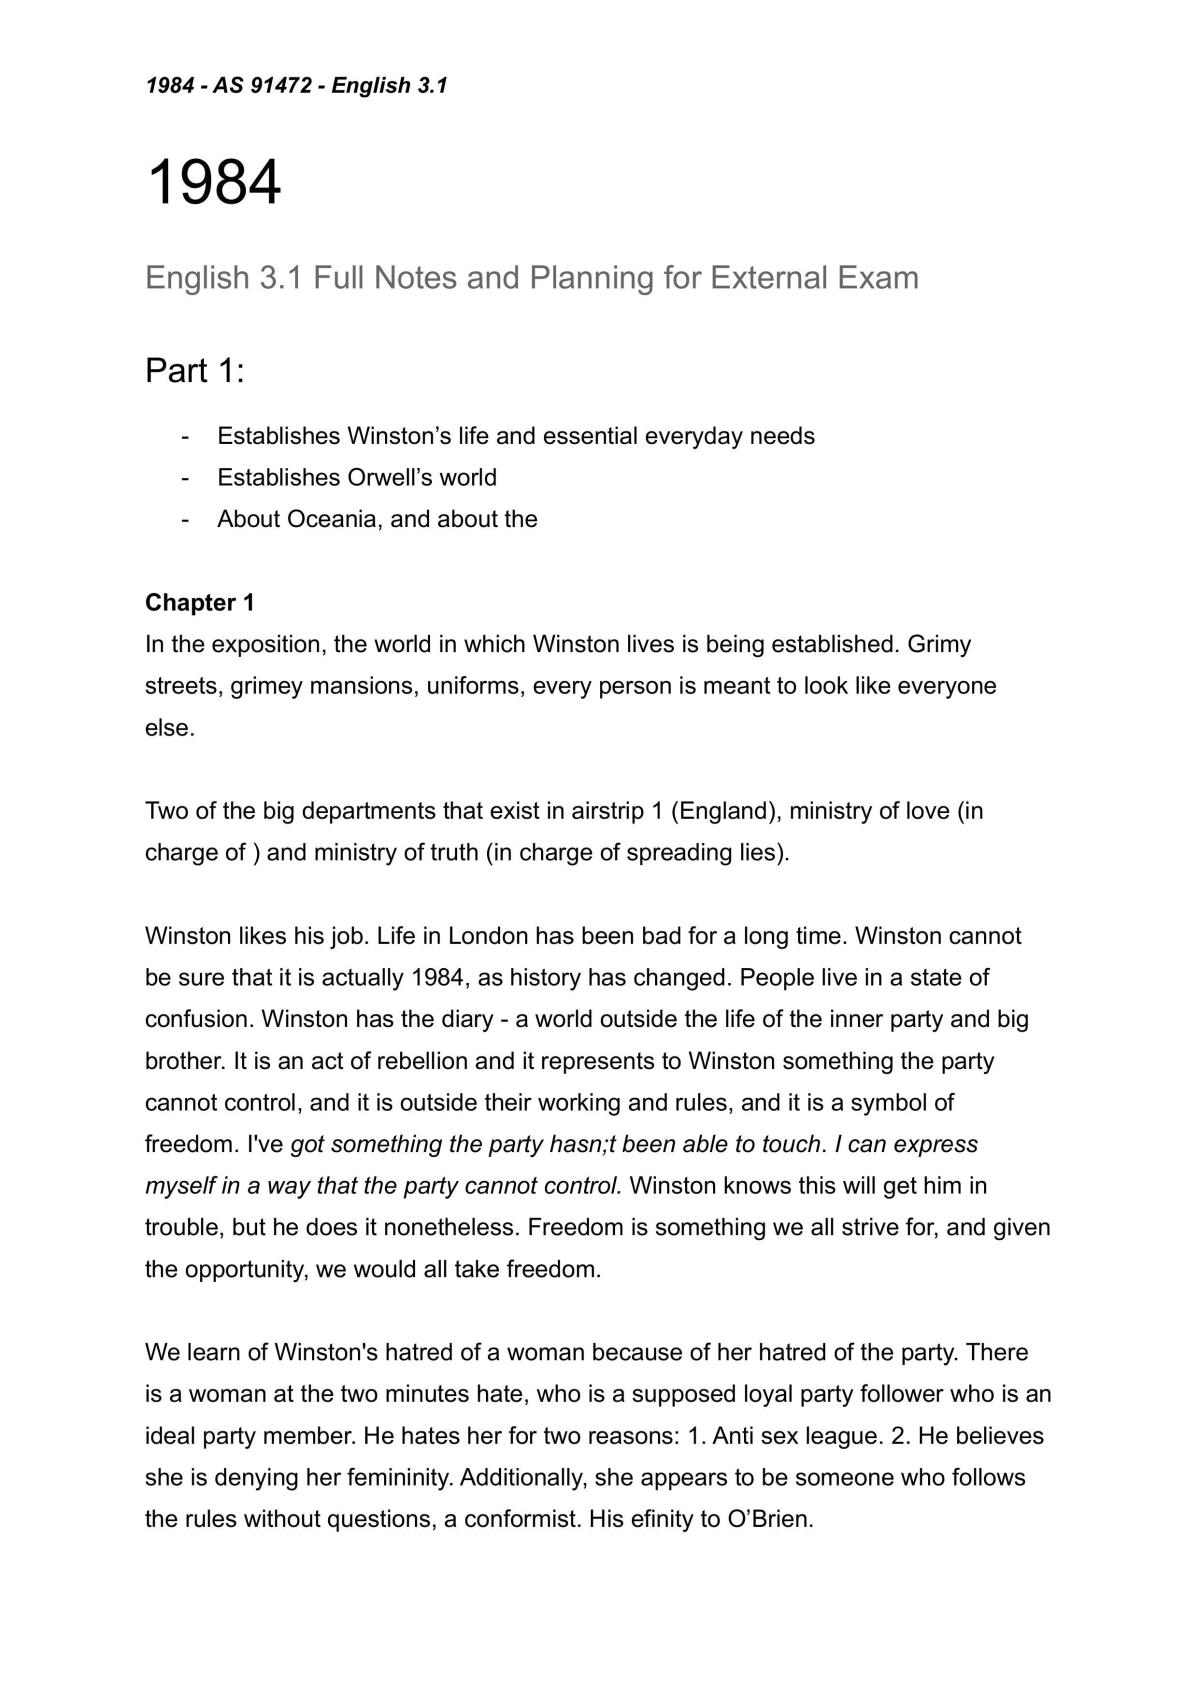 English 3.1: Full notes for the text: 1984 - Page 1